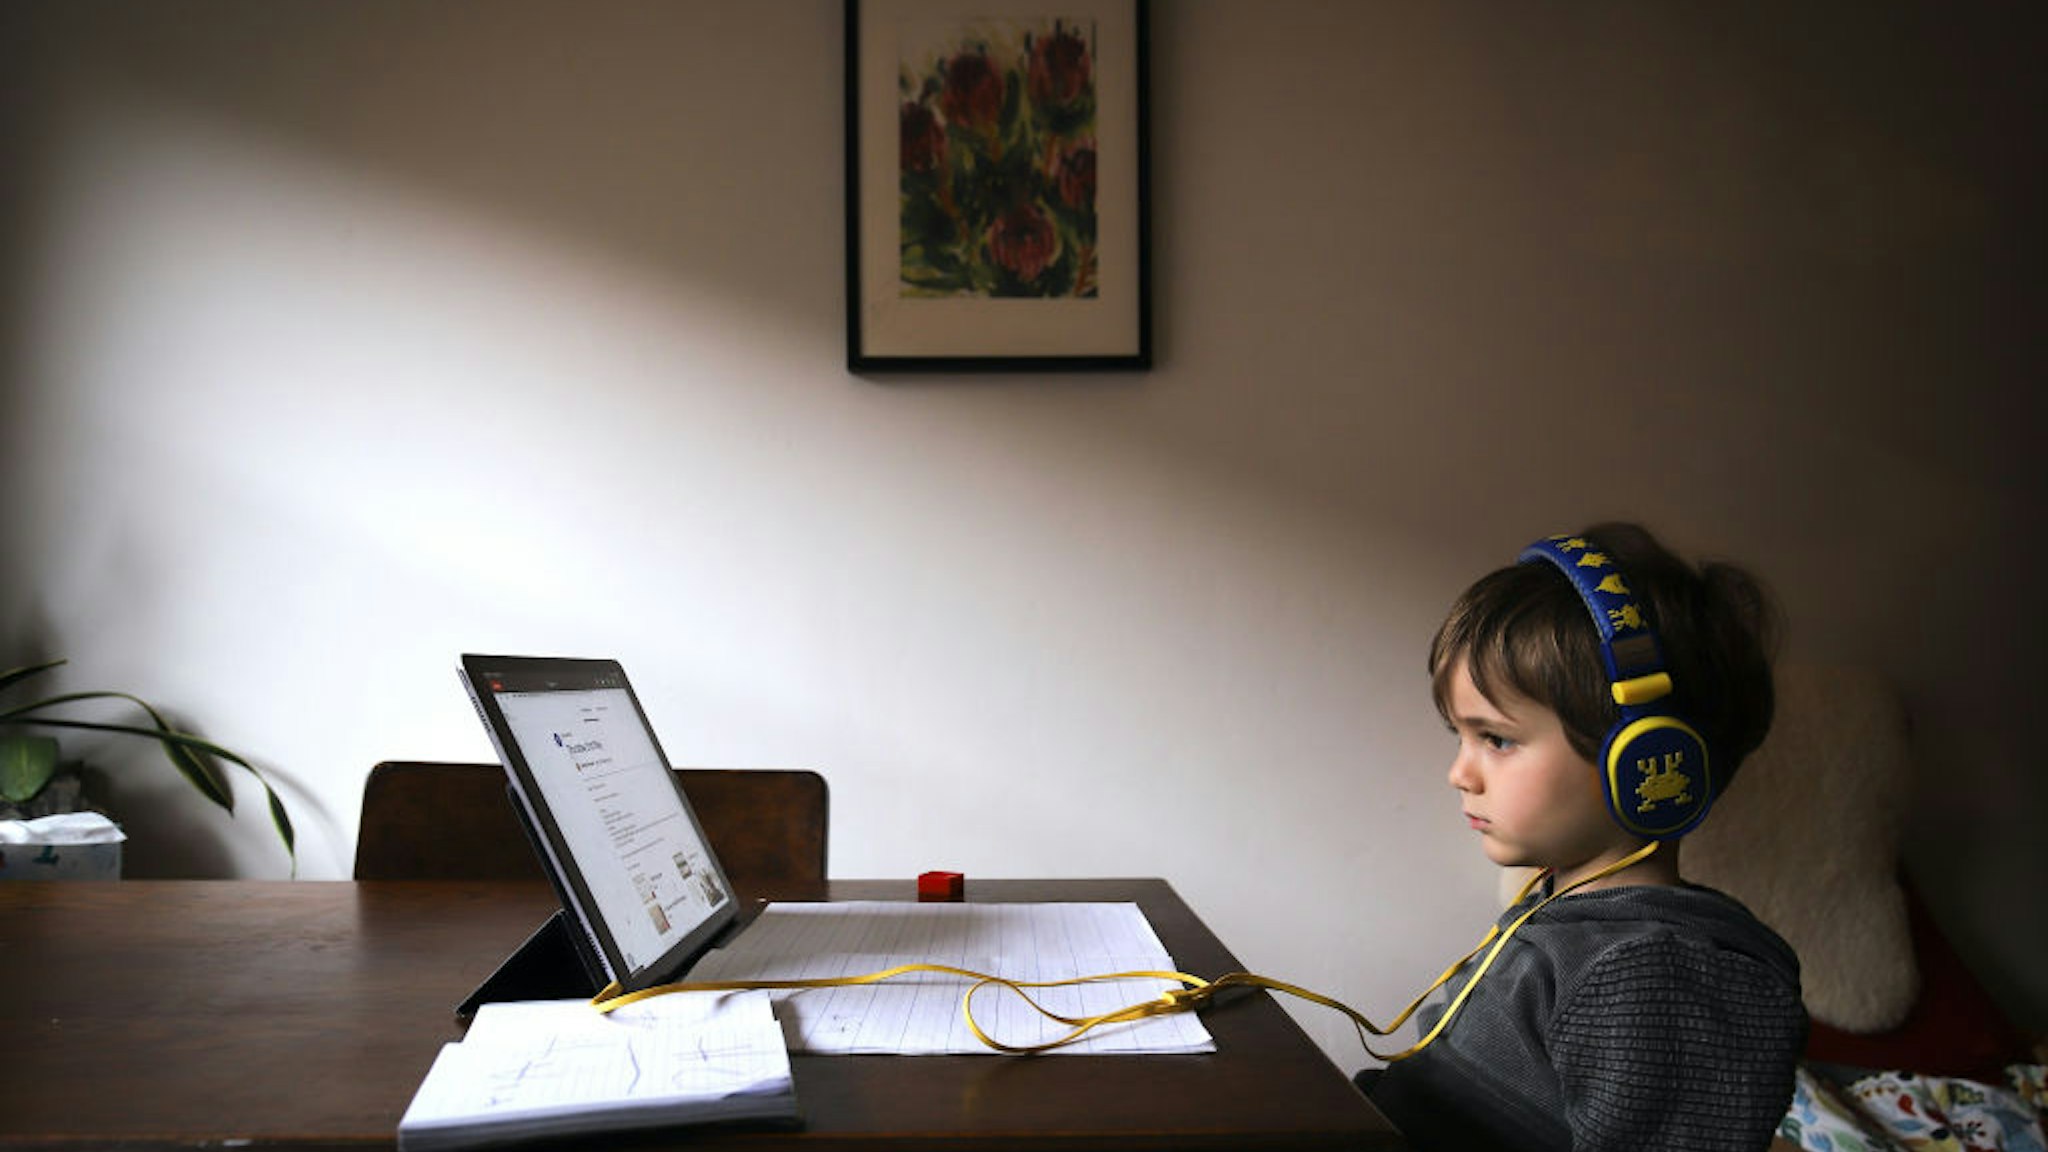 SYDNEY, AUSTRALIA - MAY 21: Six-year-old Kaya Atayman sits in front of his computer as he does homeschooling at his home in the suburb of Bondi on May 21, 2020 in Sydney, Australia. Students in New South Wales return to regular lessons today, after a week of staggered lessons, as COVID-19 restrictions ease across Australia. (Photo by David Gray/Getty Images)